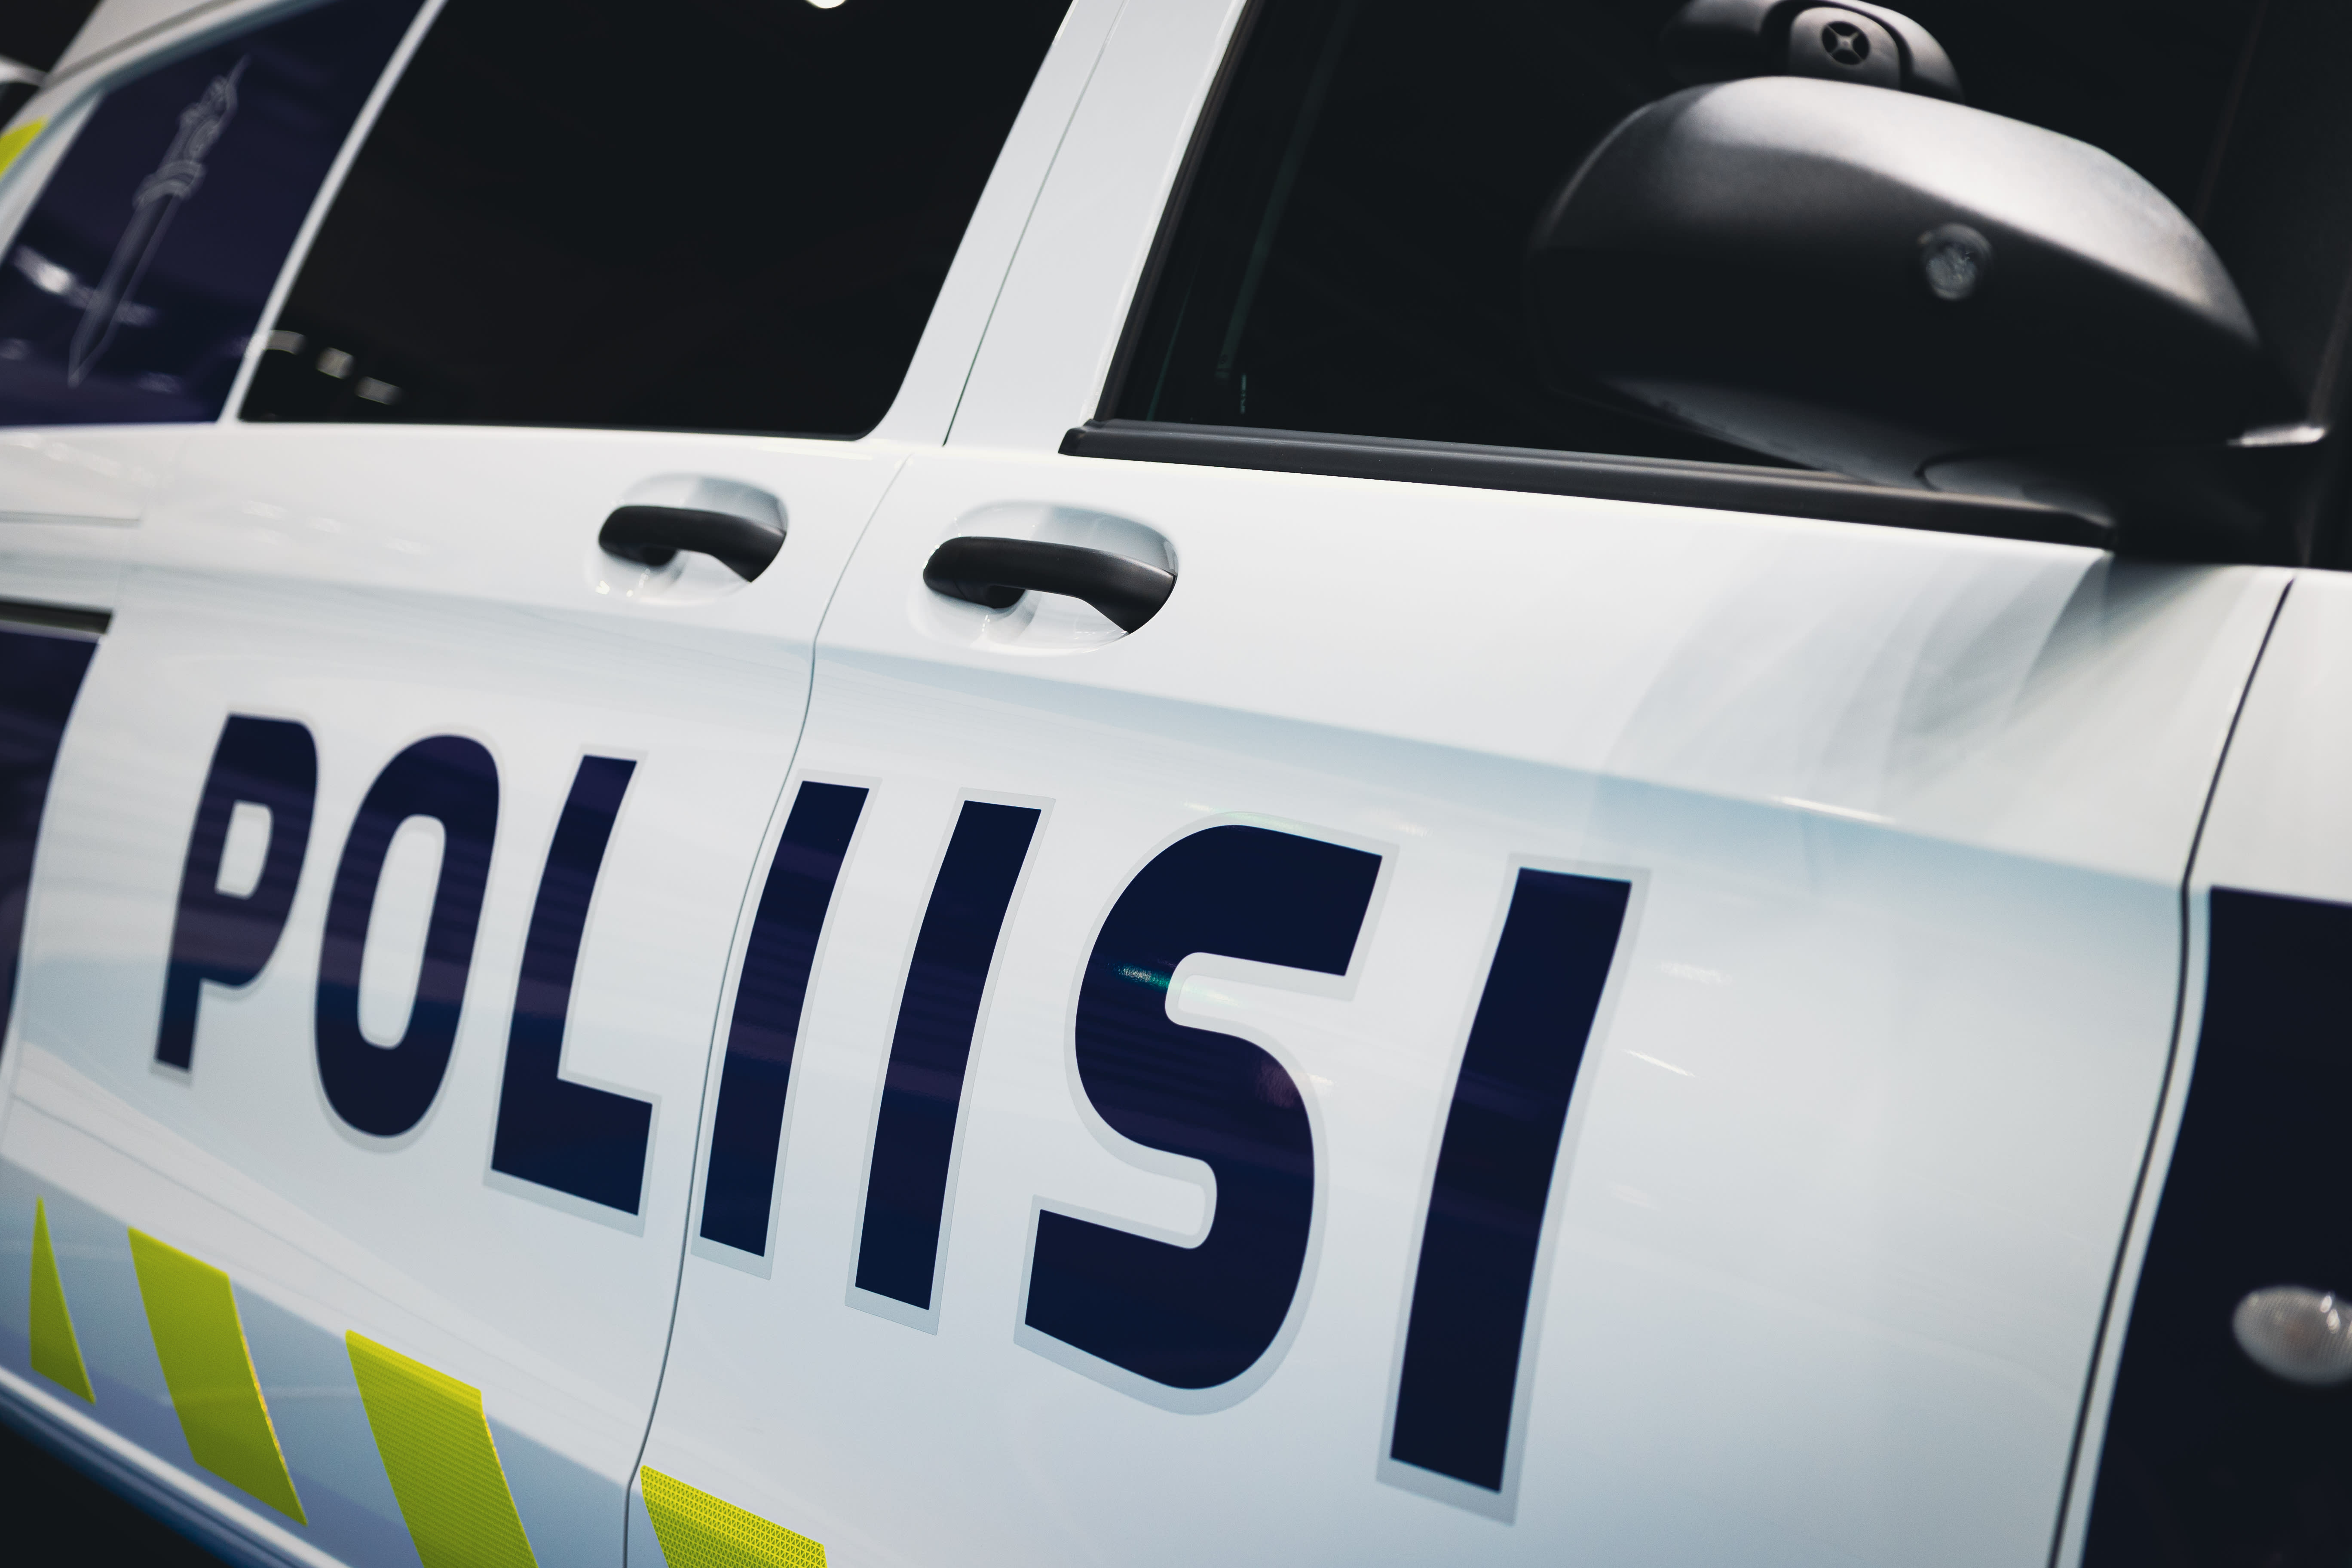 The police are warning motorists when a car hit children at a crosswalk in Espoo